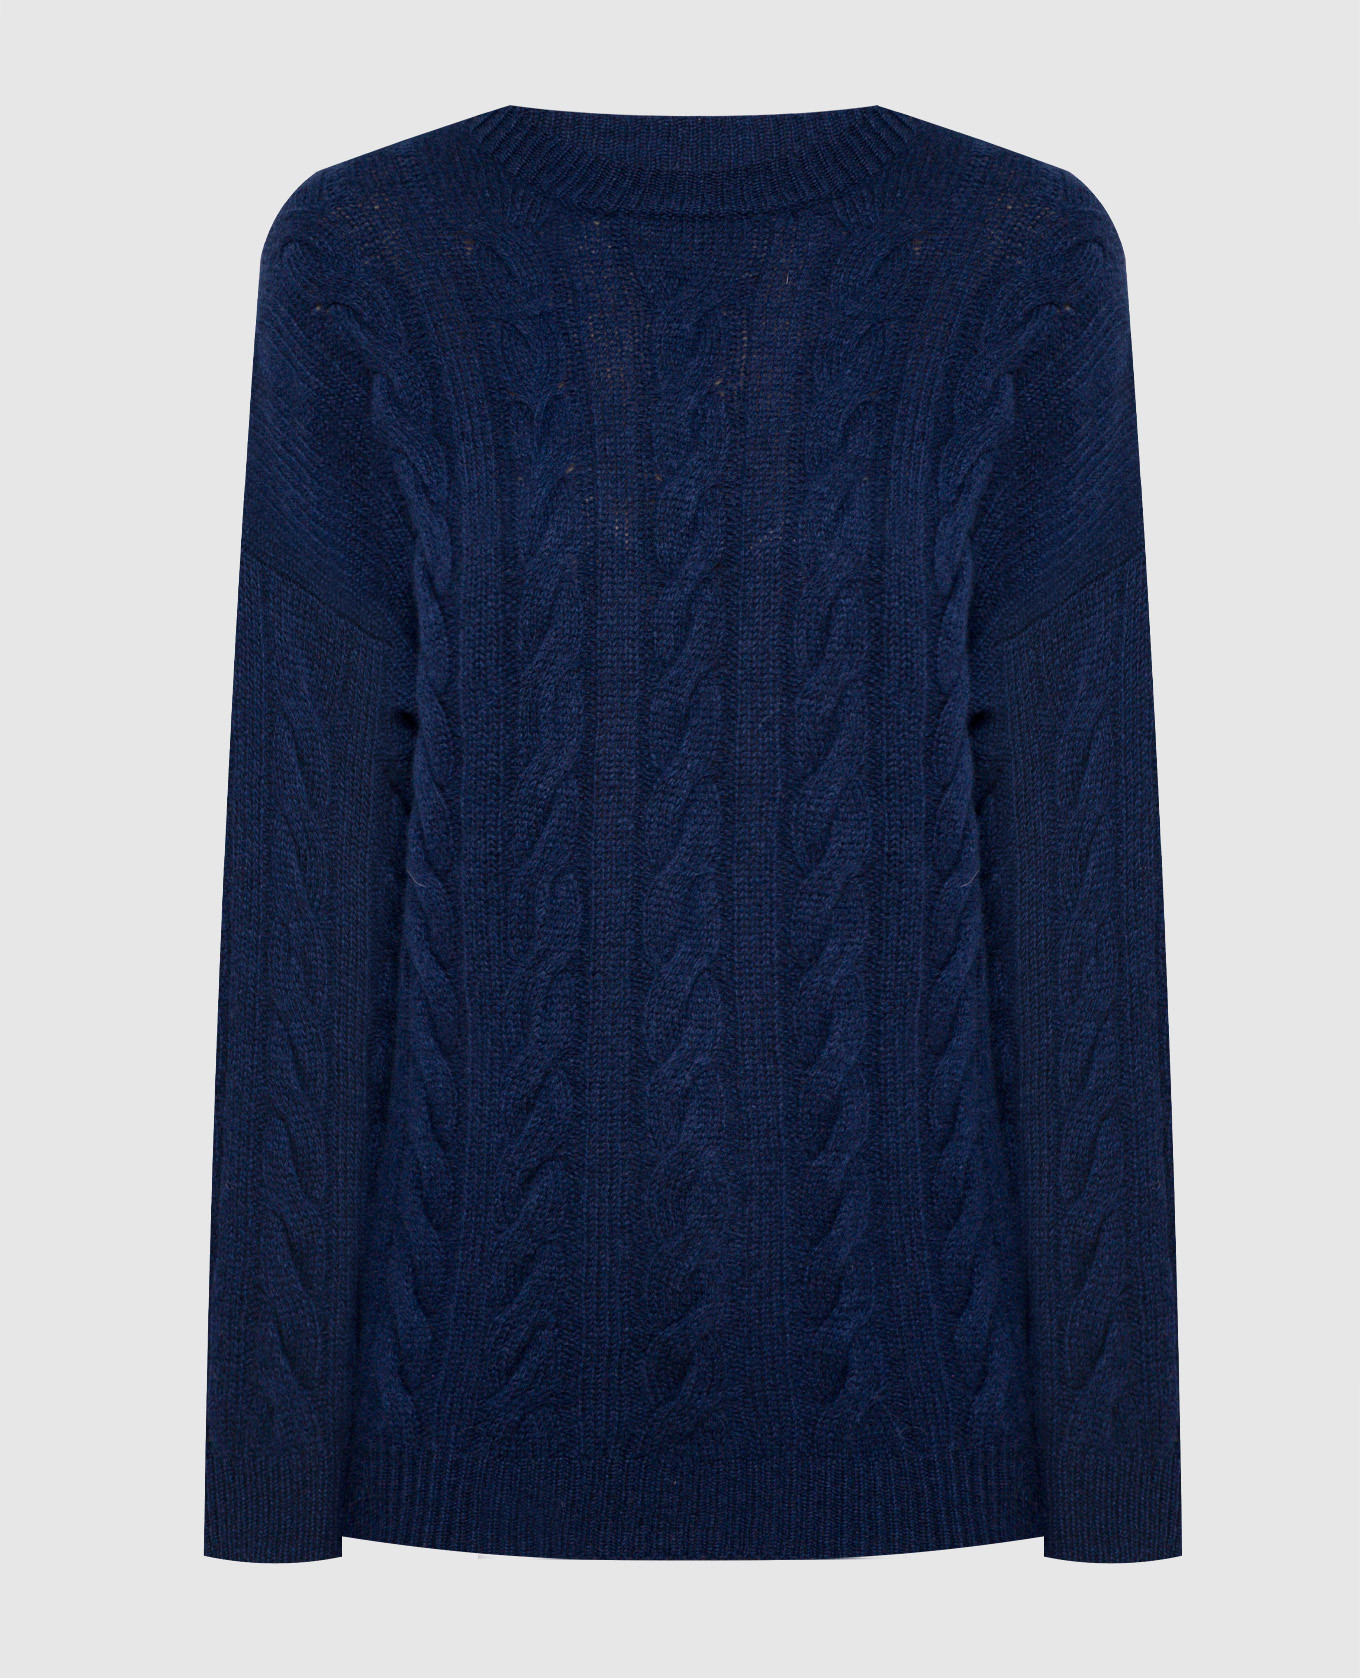 Blue sweater made of wool and cashmere in a textured pattern